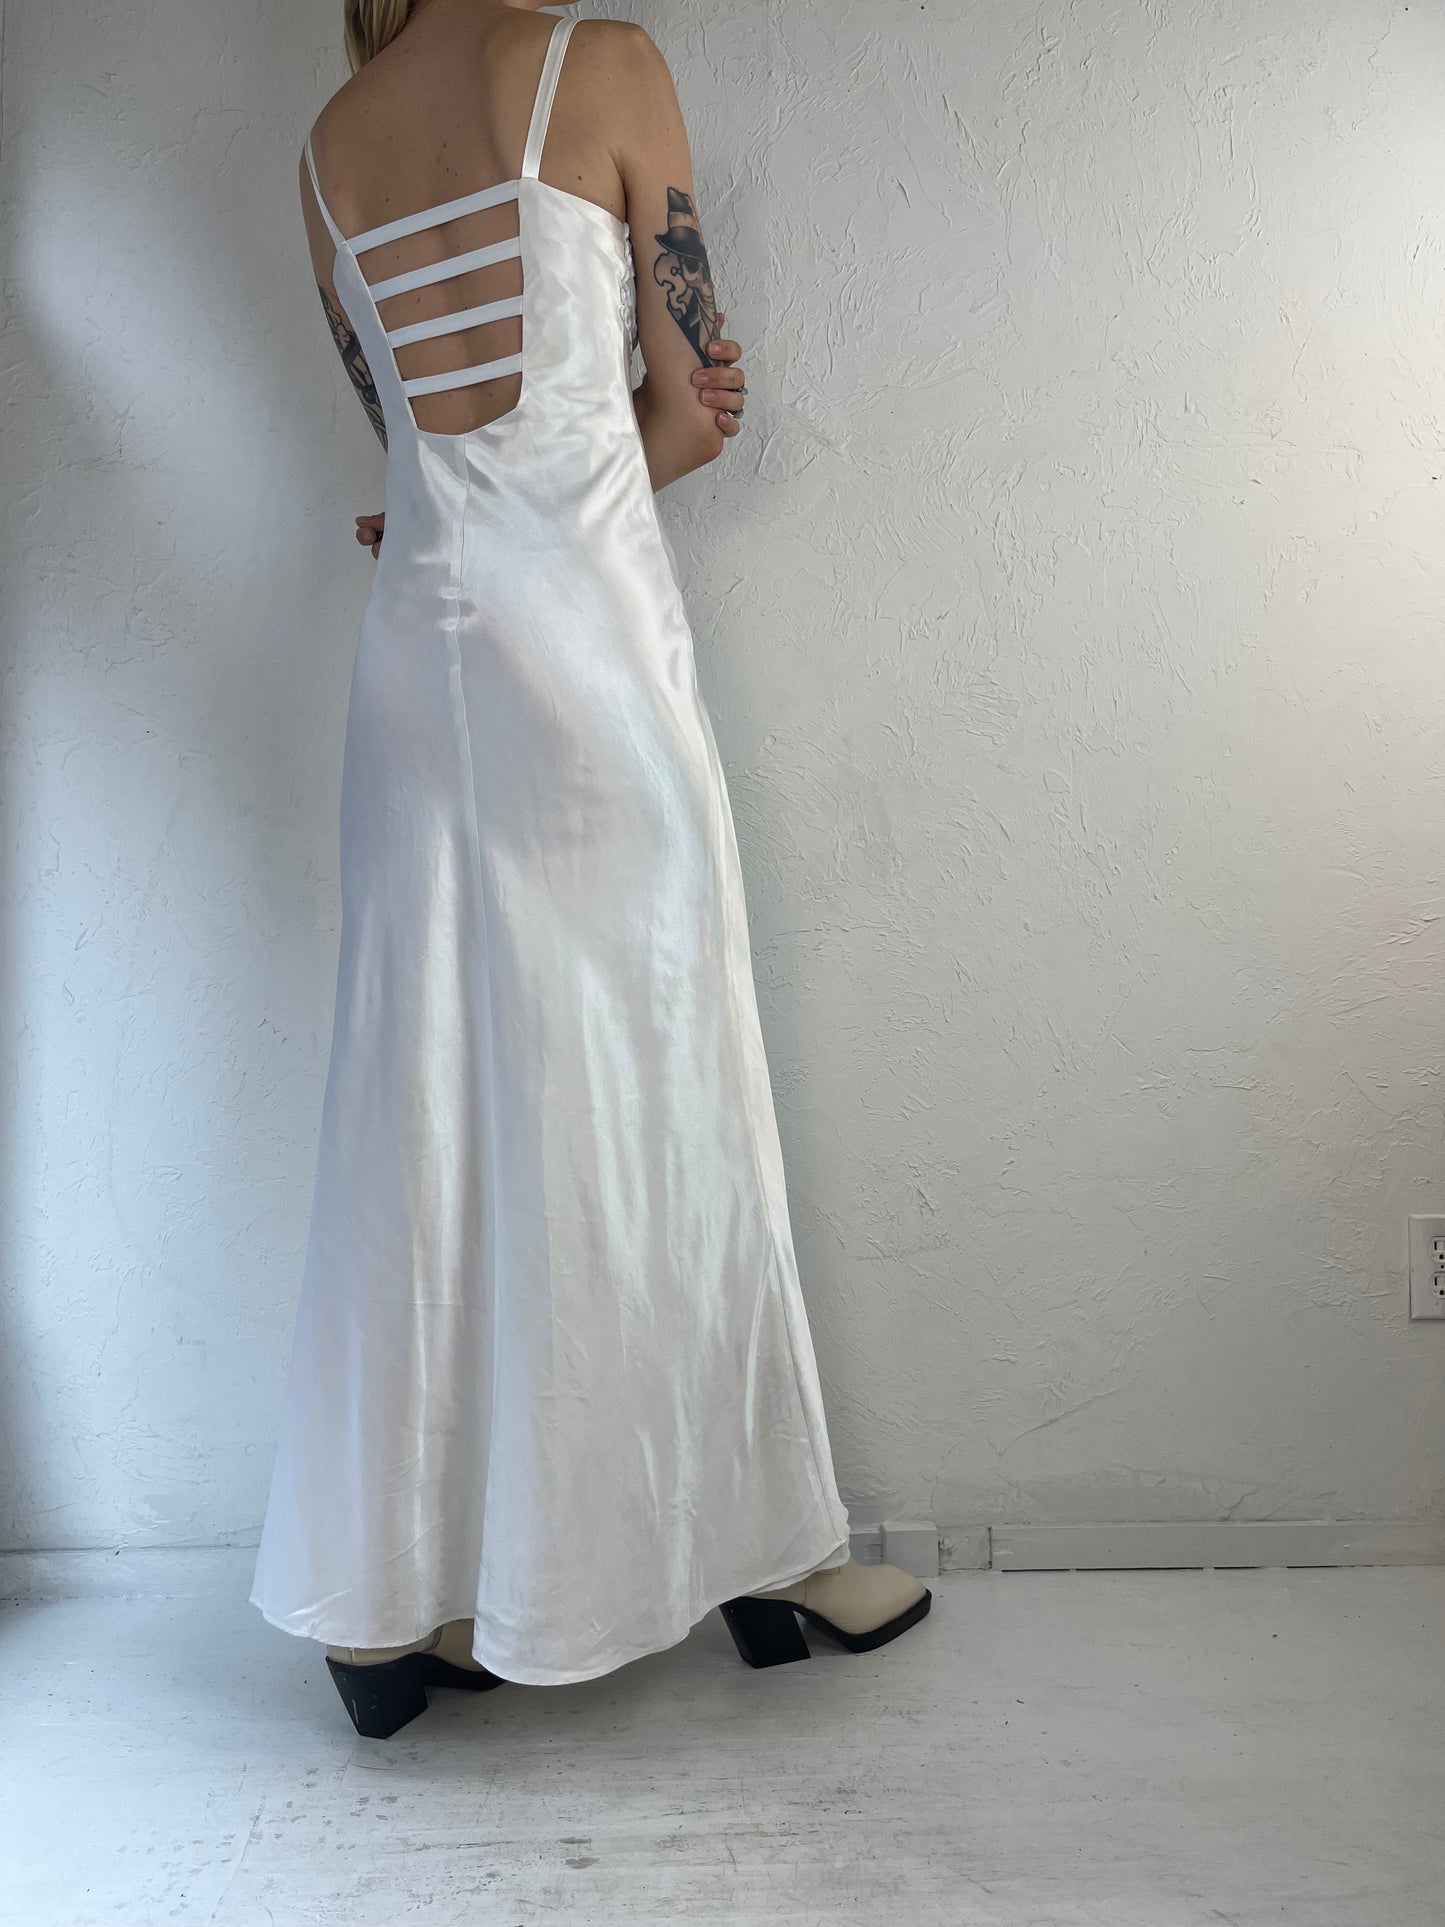 90s 'Roberta' White Backless Formal Gown Dress / Small